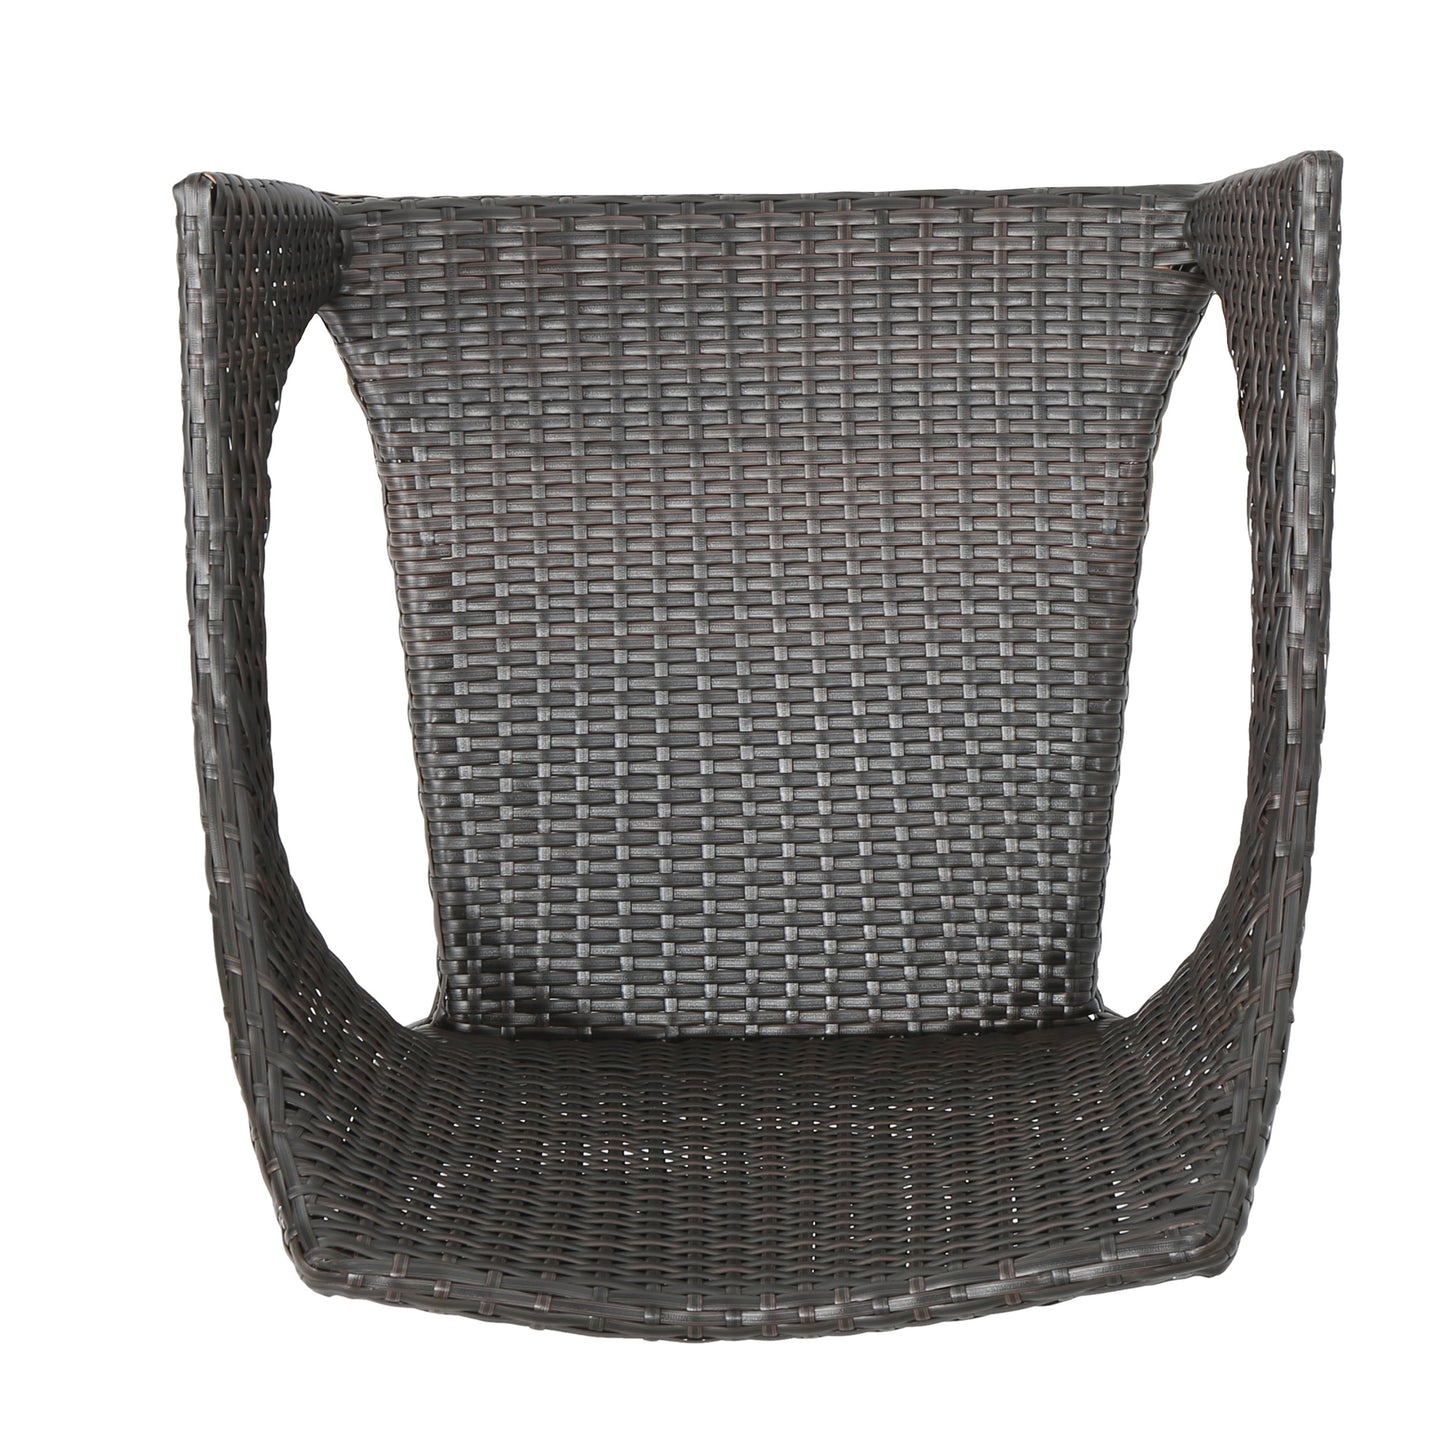 Axelrod Outdoor 3 Piece Multi-Brown Wicker Chat Set with Stacking Chairs